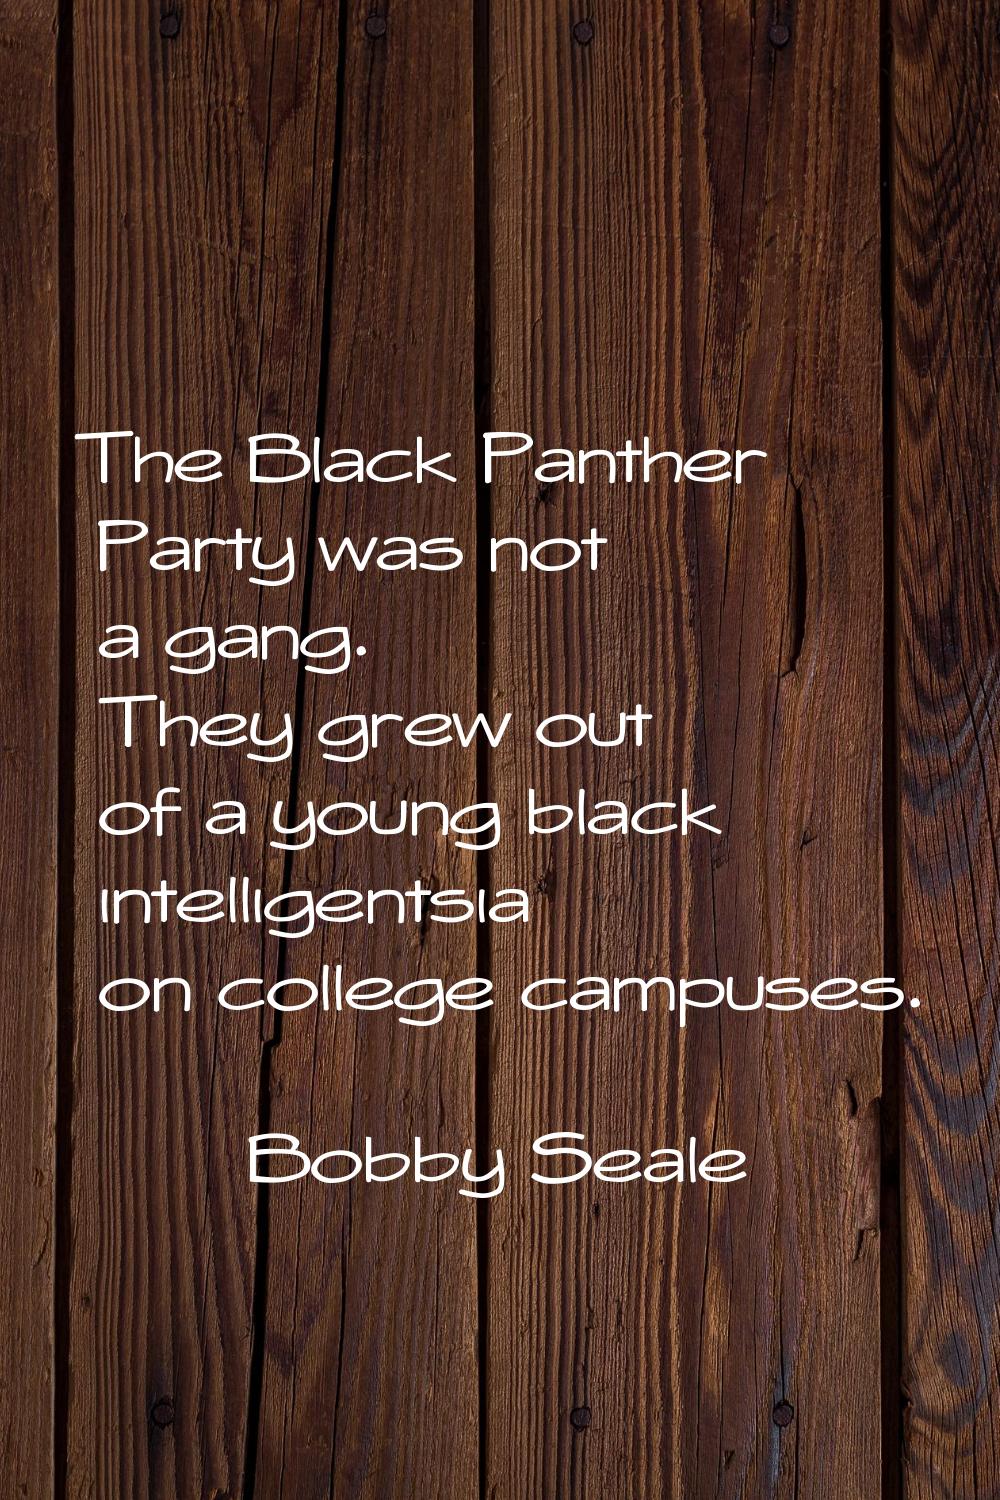 The Black Panther Party was not a gang. They grew out of a young black intelligentsia on college ca